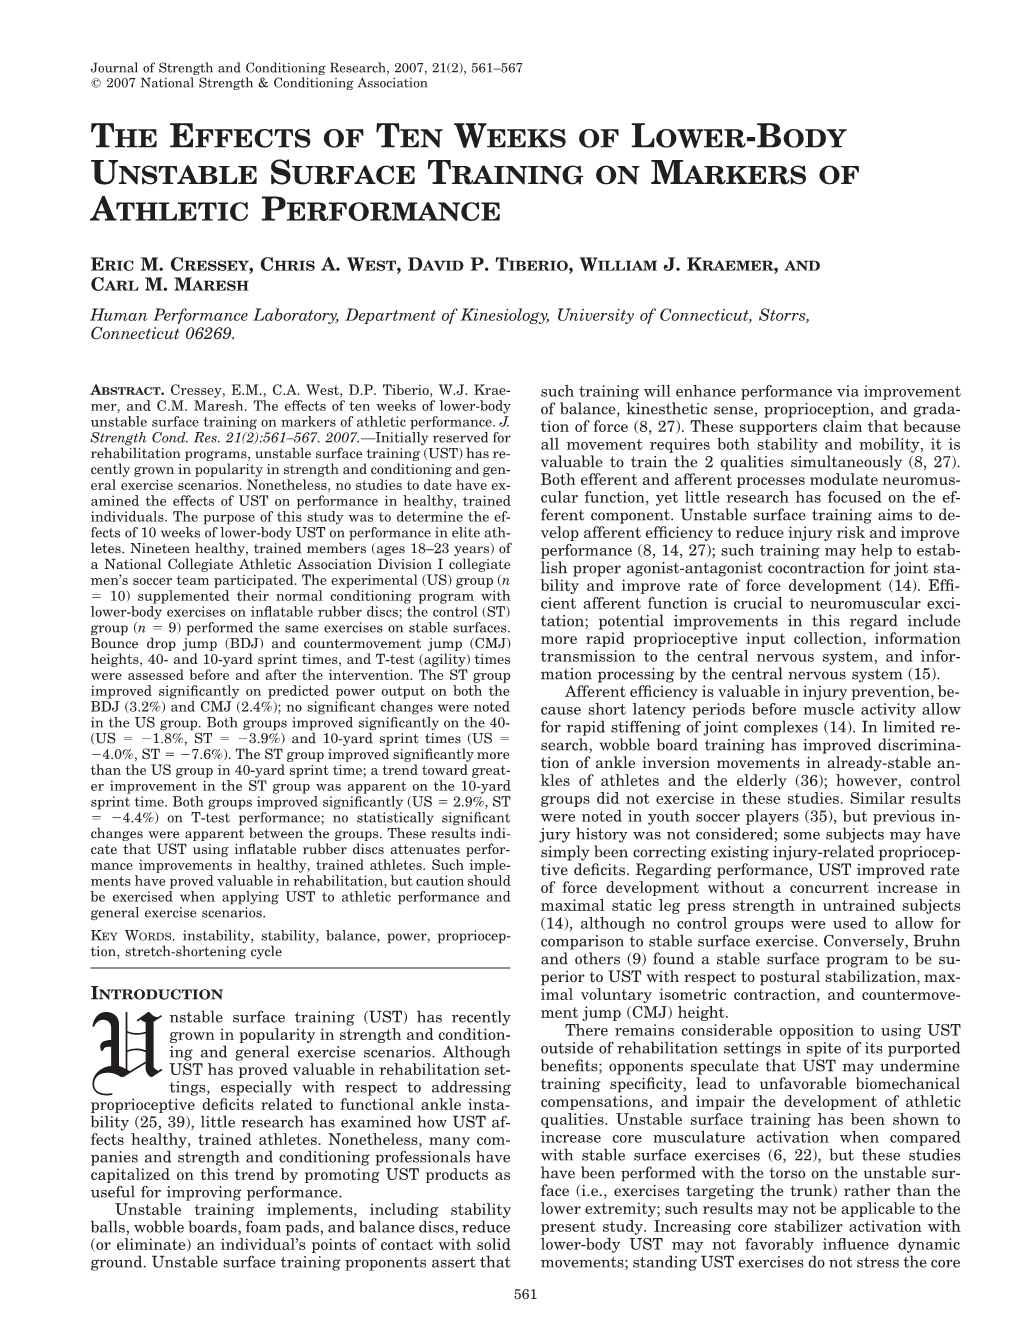 The Effects of Ten Weeks of Lower-Body Unstable Surface Training on Markers of Athletic Performance